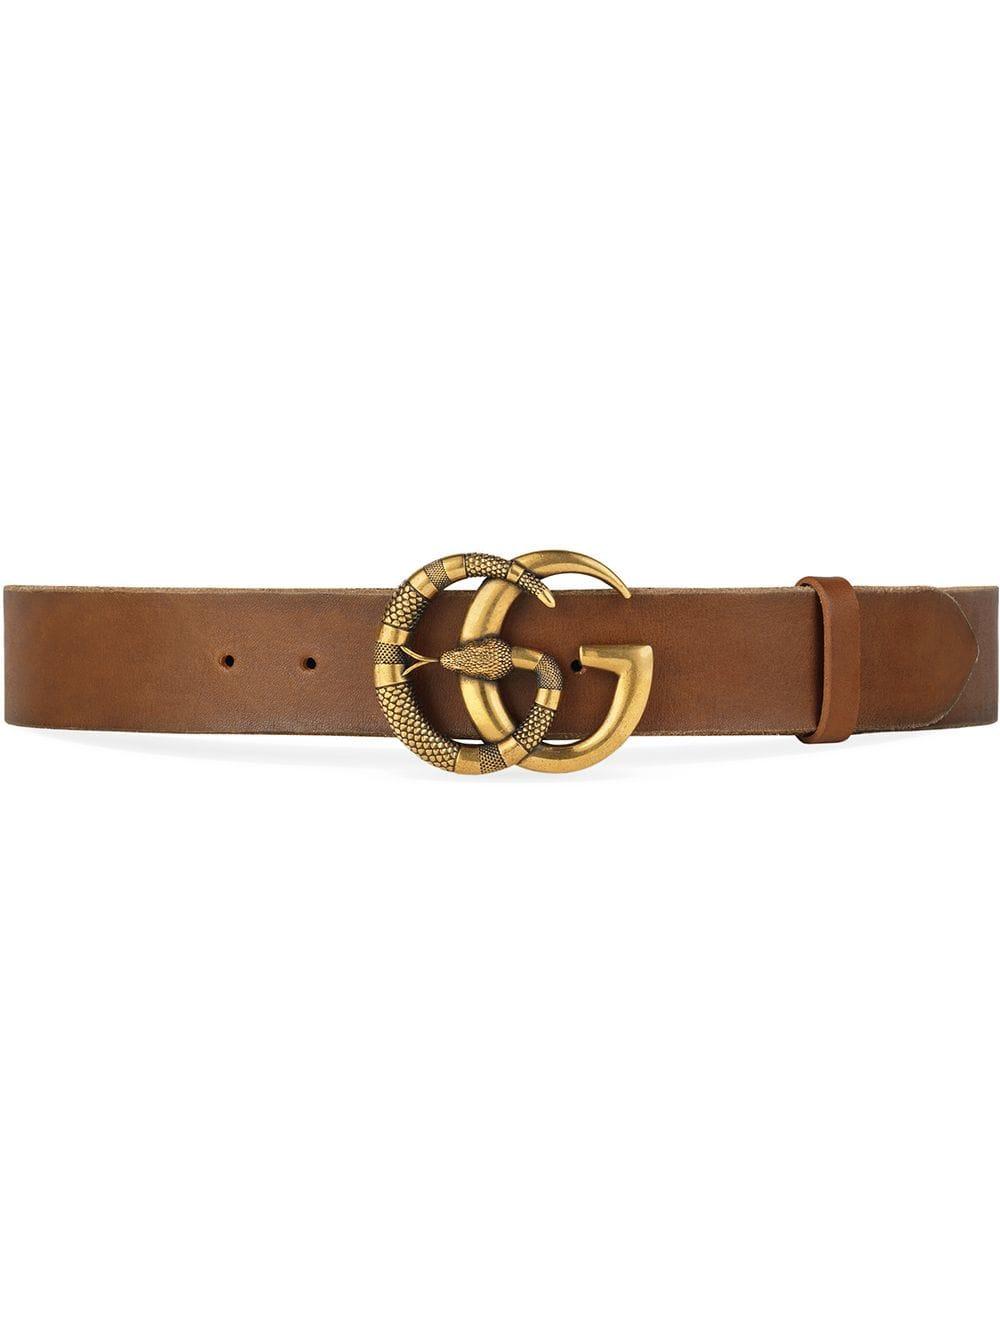 Gucci Leather Belt With Double G Buckle With Snake in Brown for Men - Save 9% - Lyst